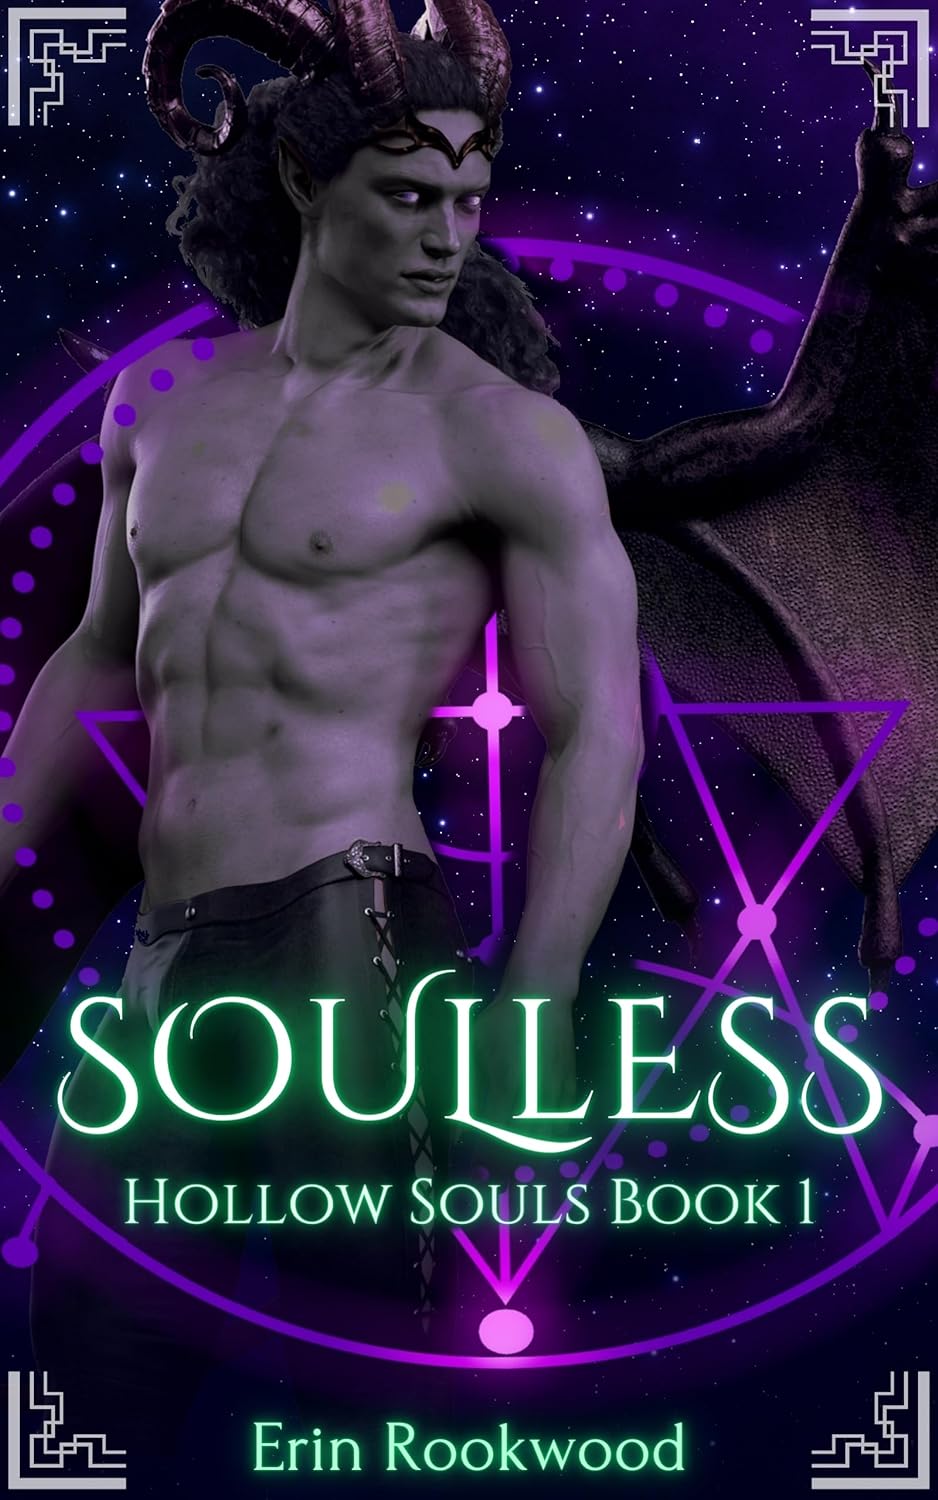 Soulless by Erin Rookwood